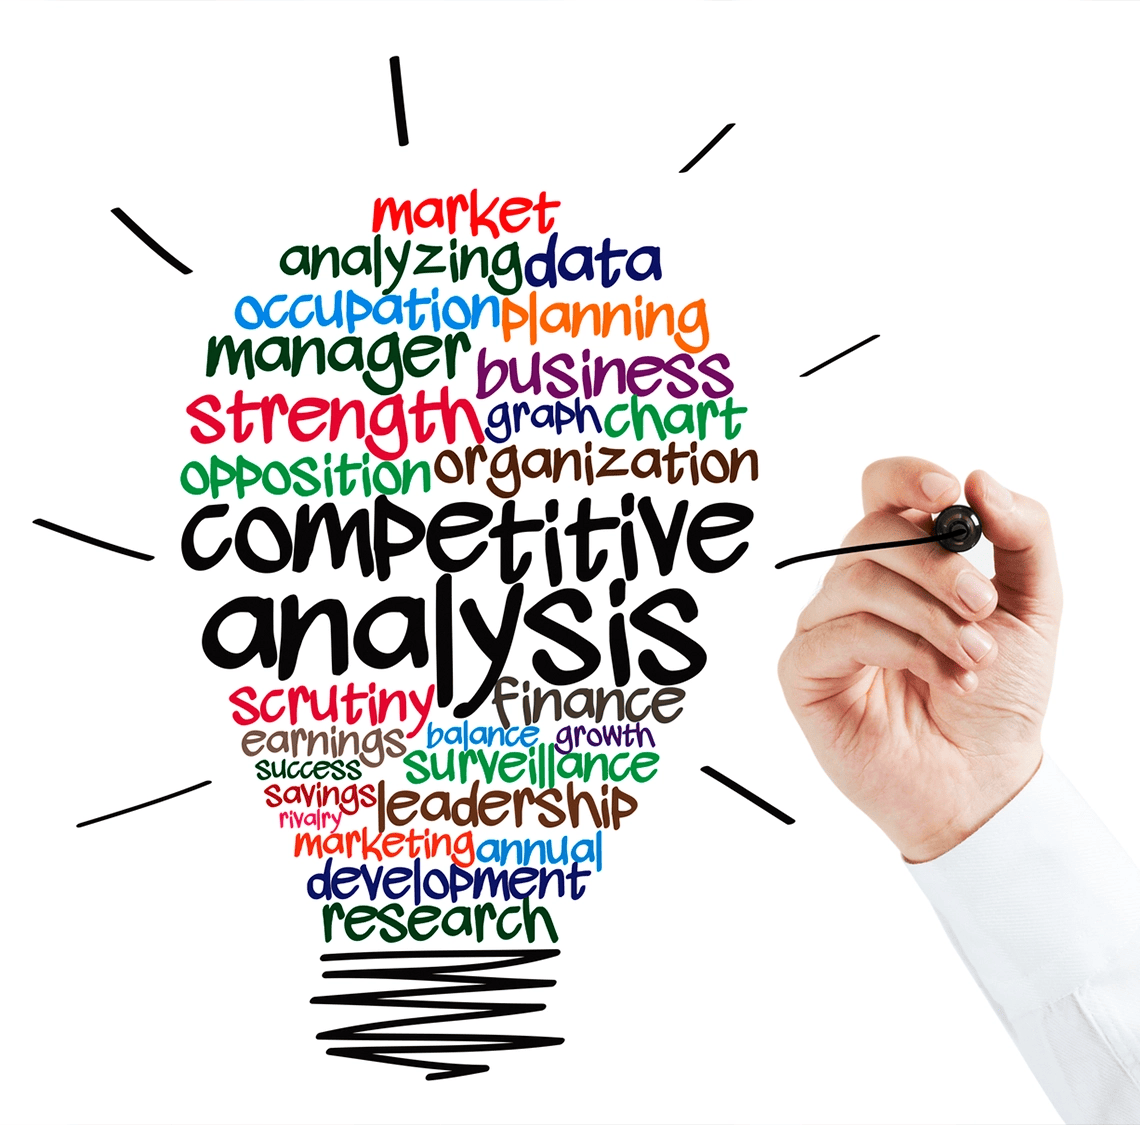 How do you analyze your competitors thoughtfully?